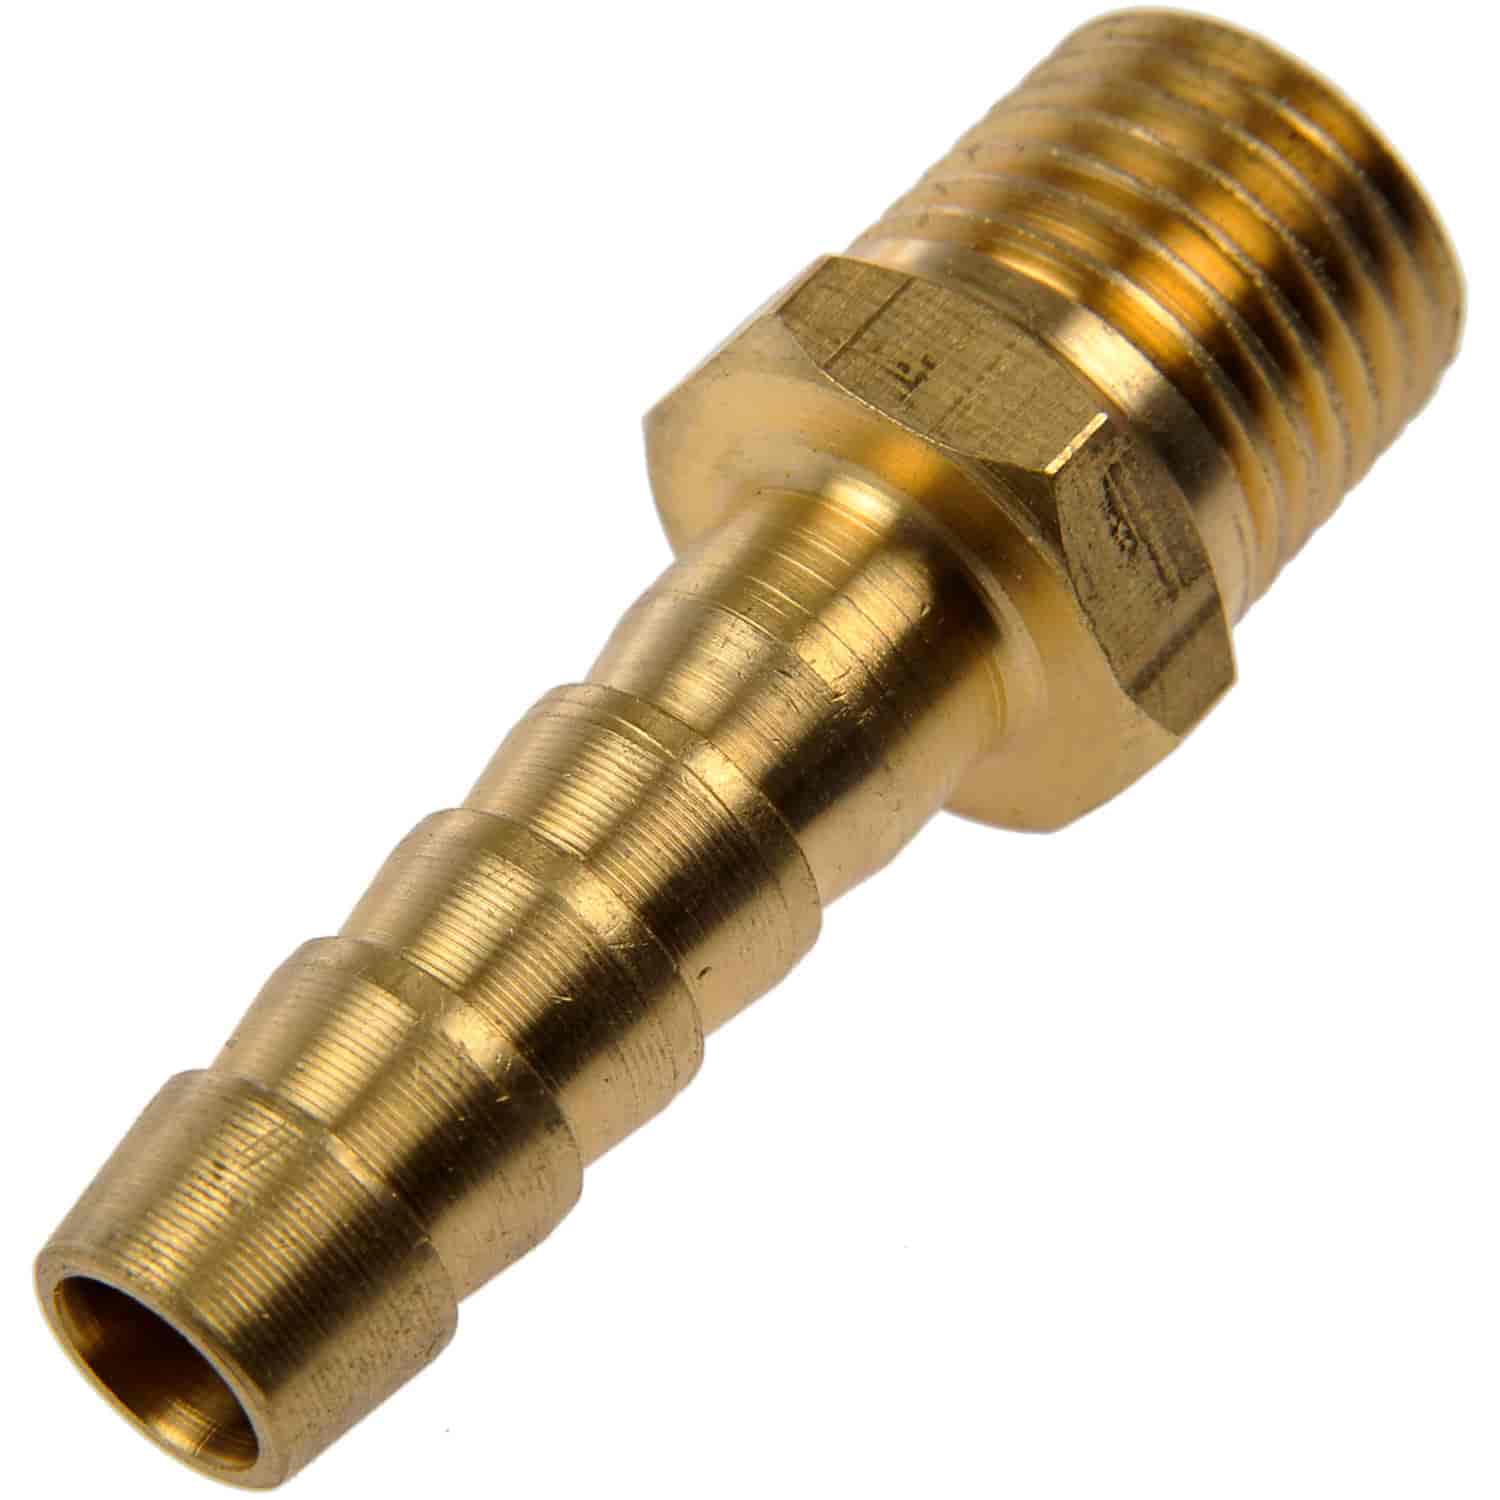 Fuel Hose Fitting-Male Connector-5/16 In. x 1/4 In. MNPT